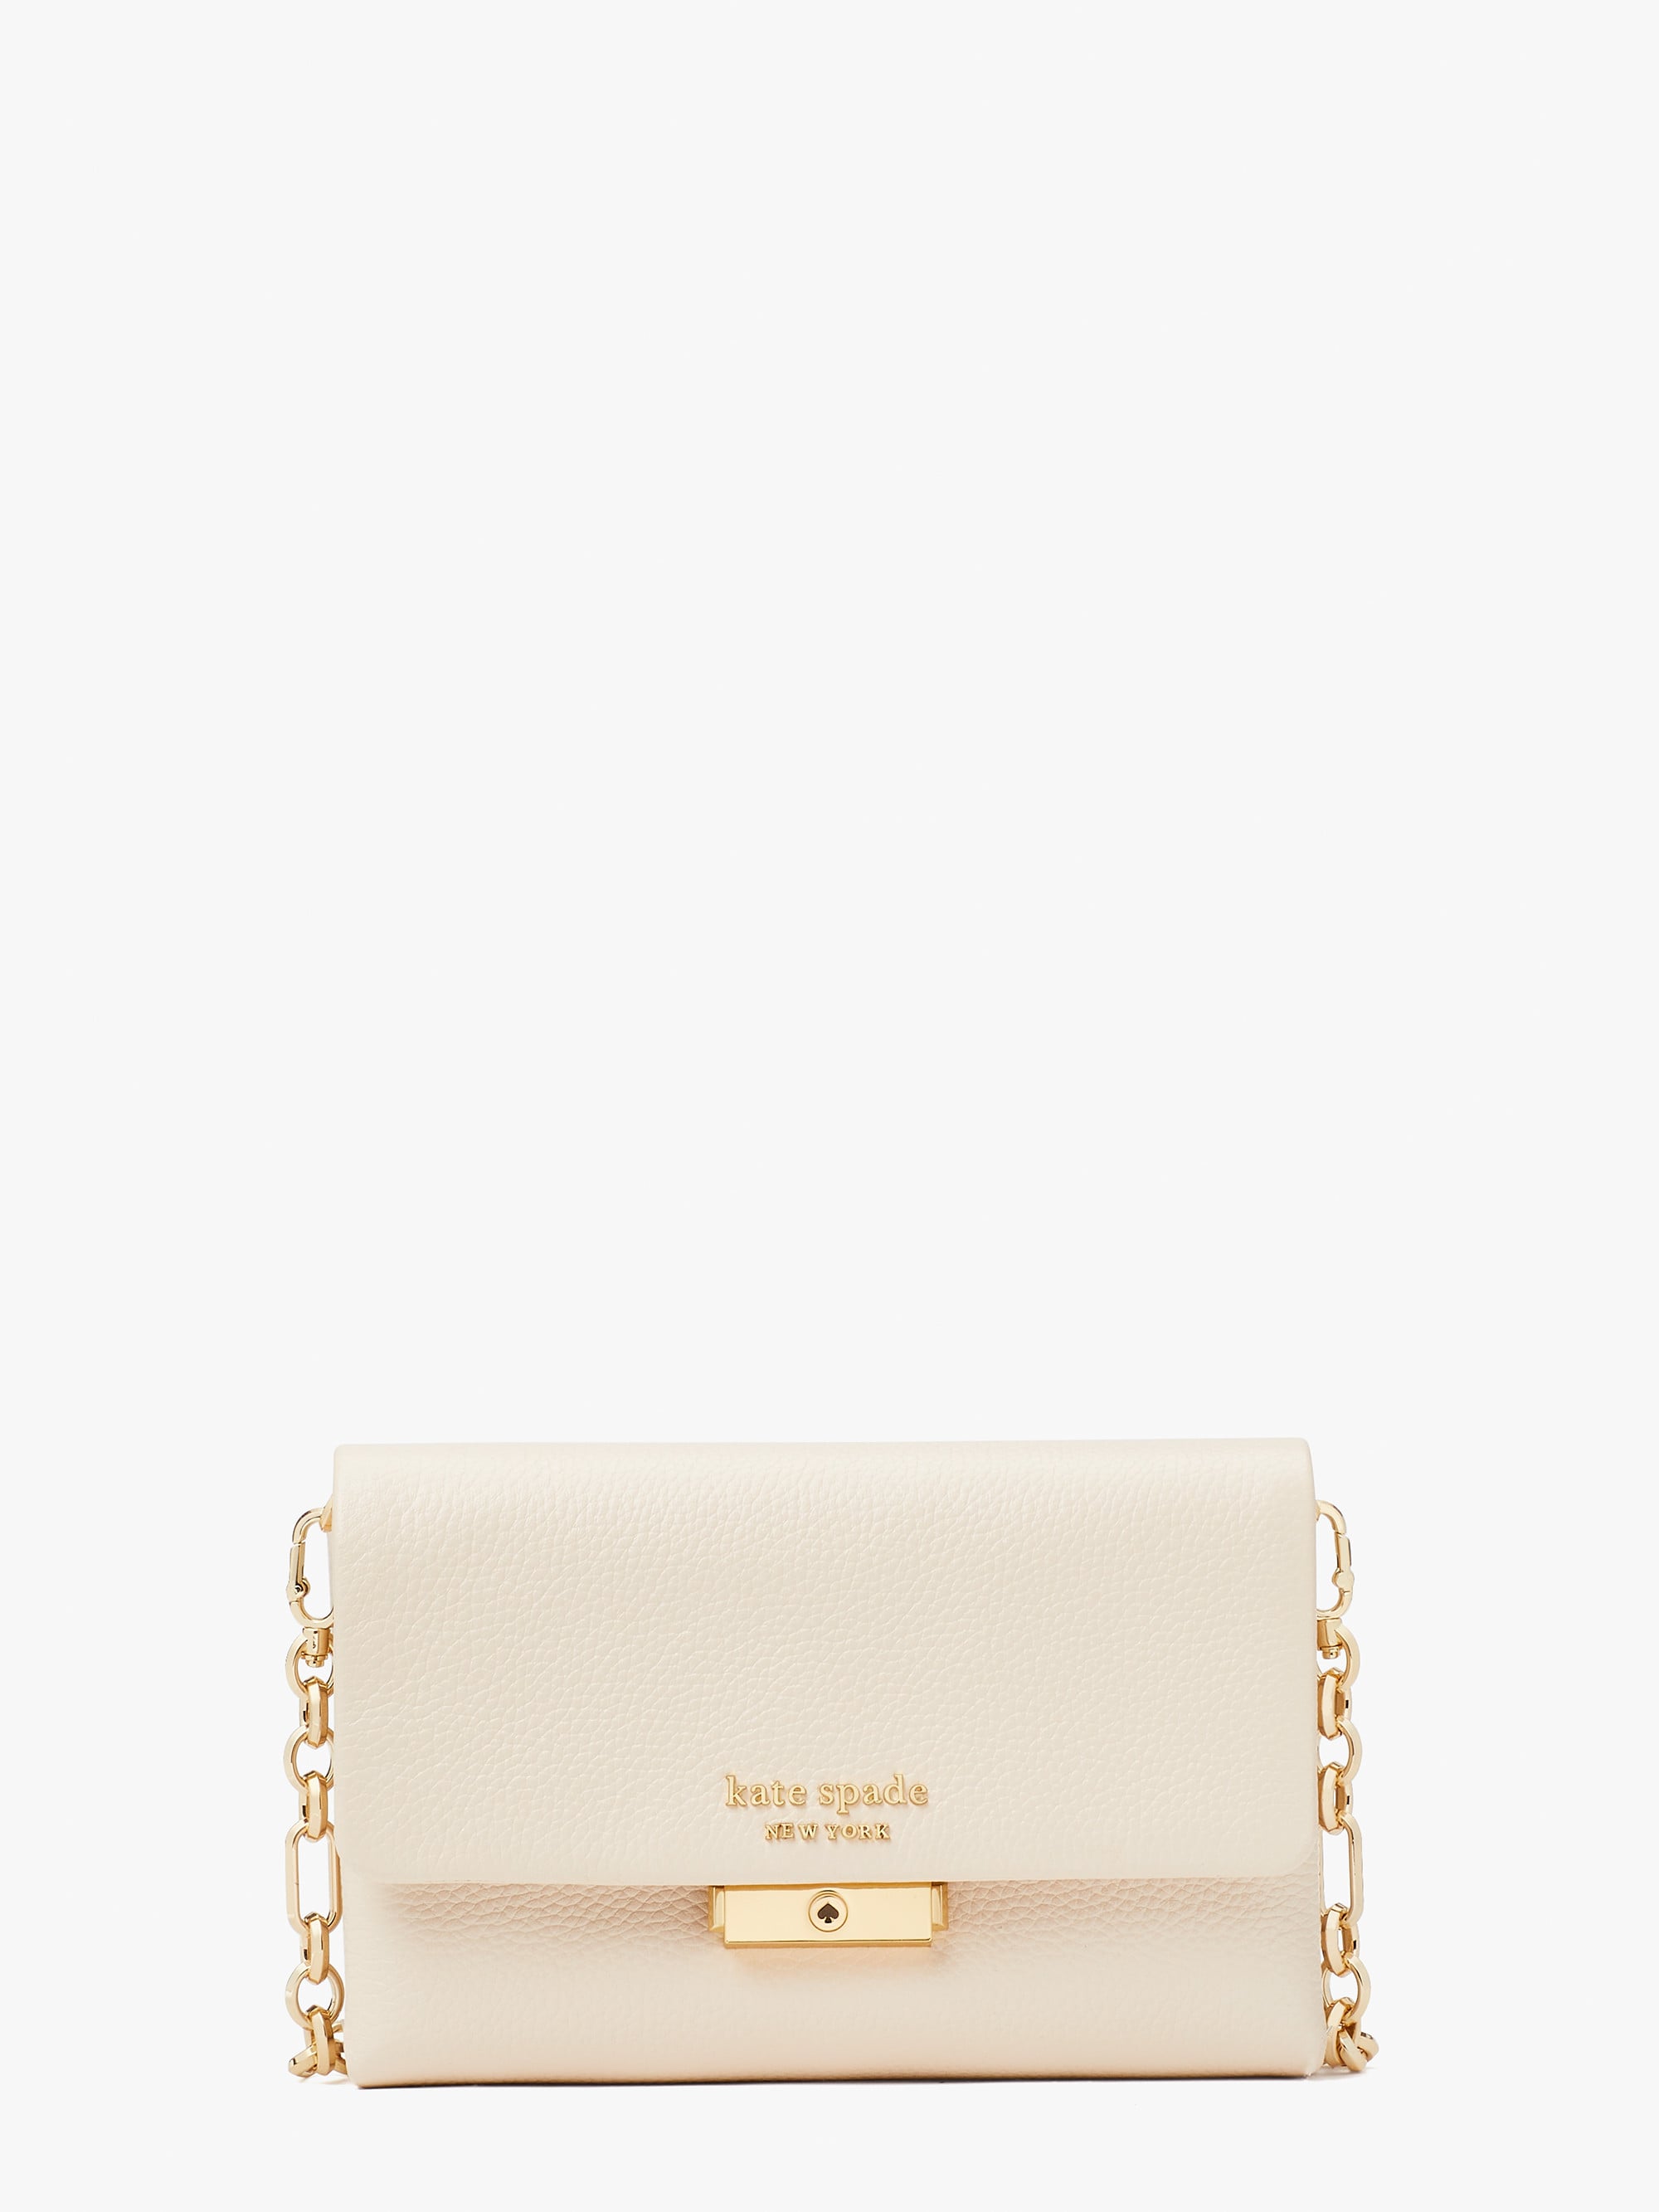 Best Bags From the Kate Spade New York Spring Sale 2022